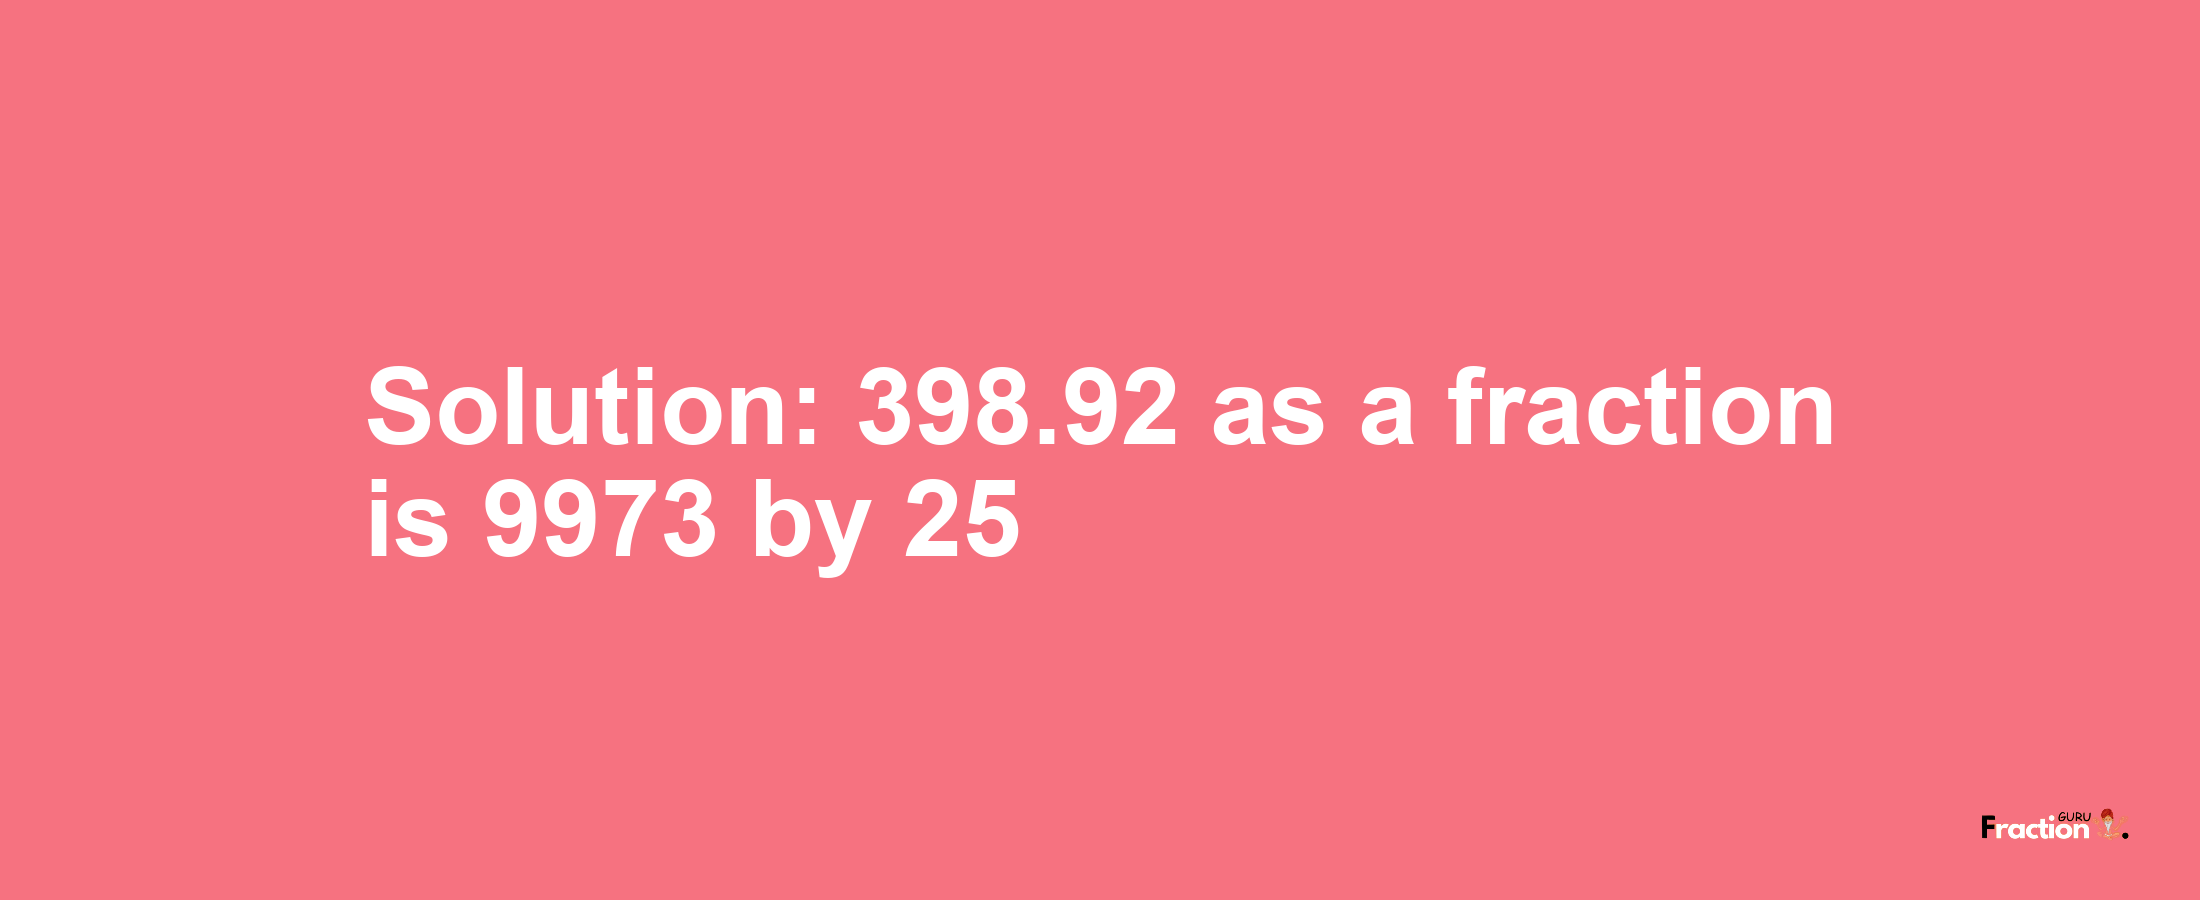 Solution:398.92 as a fraction is 9973/25